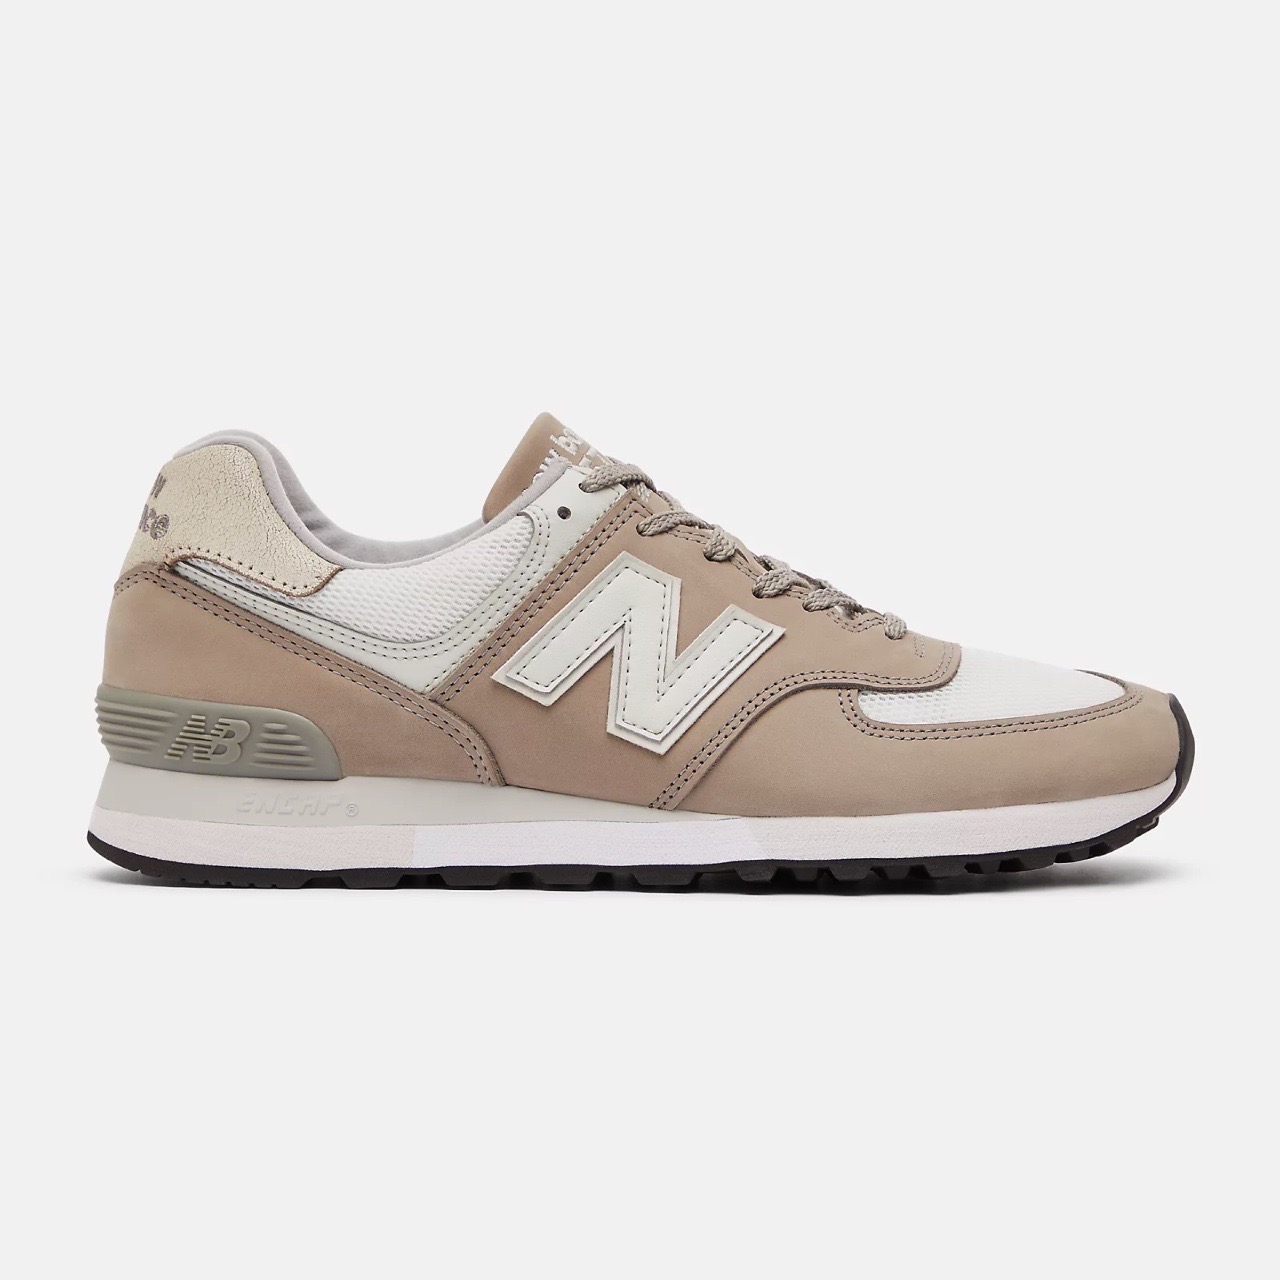 New Balance 576 Made In UK Brown Flint gray with star white and toasted nut